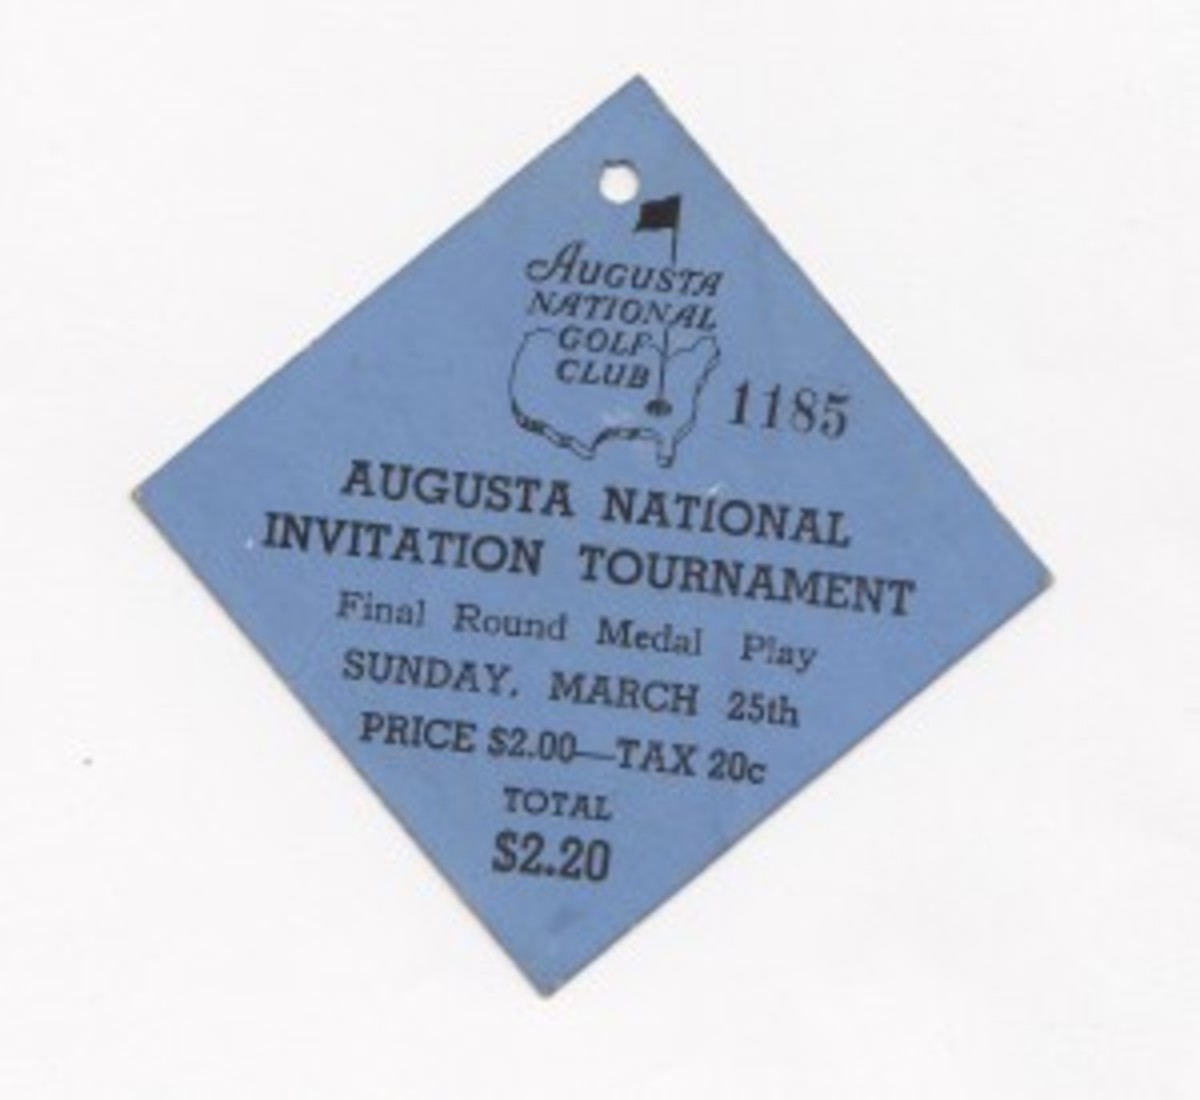 To the uninitiated, this badge is underwhelming. But considering it is one of five known badges from the 1934 Masters, it is expected to bring $40,000-$50,000.